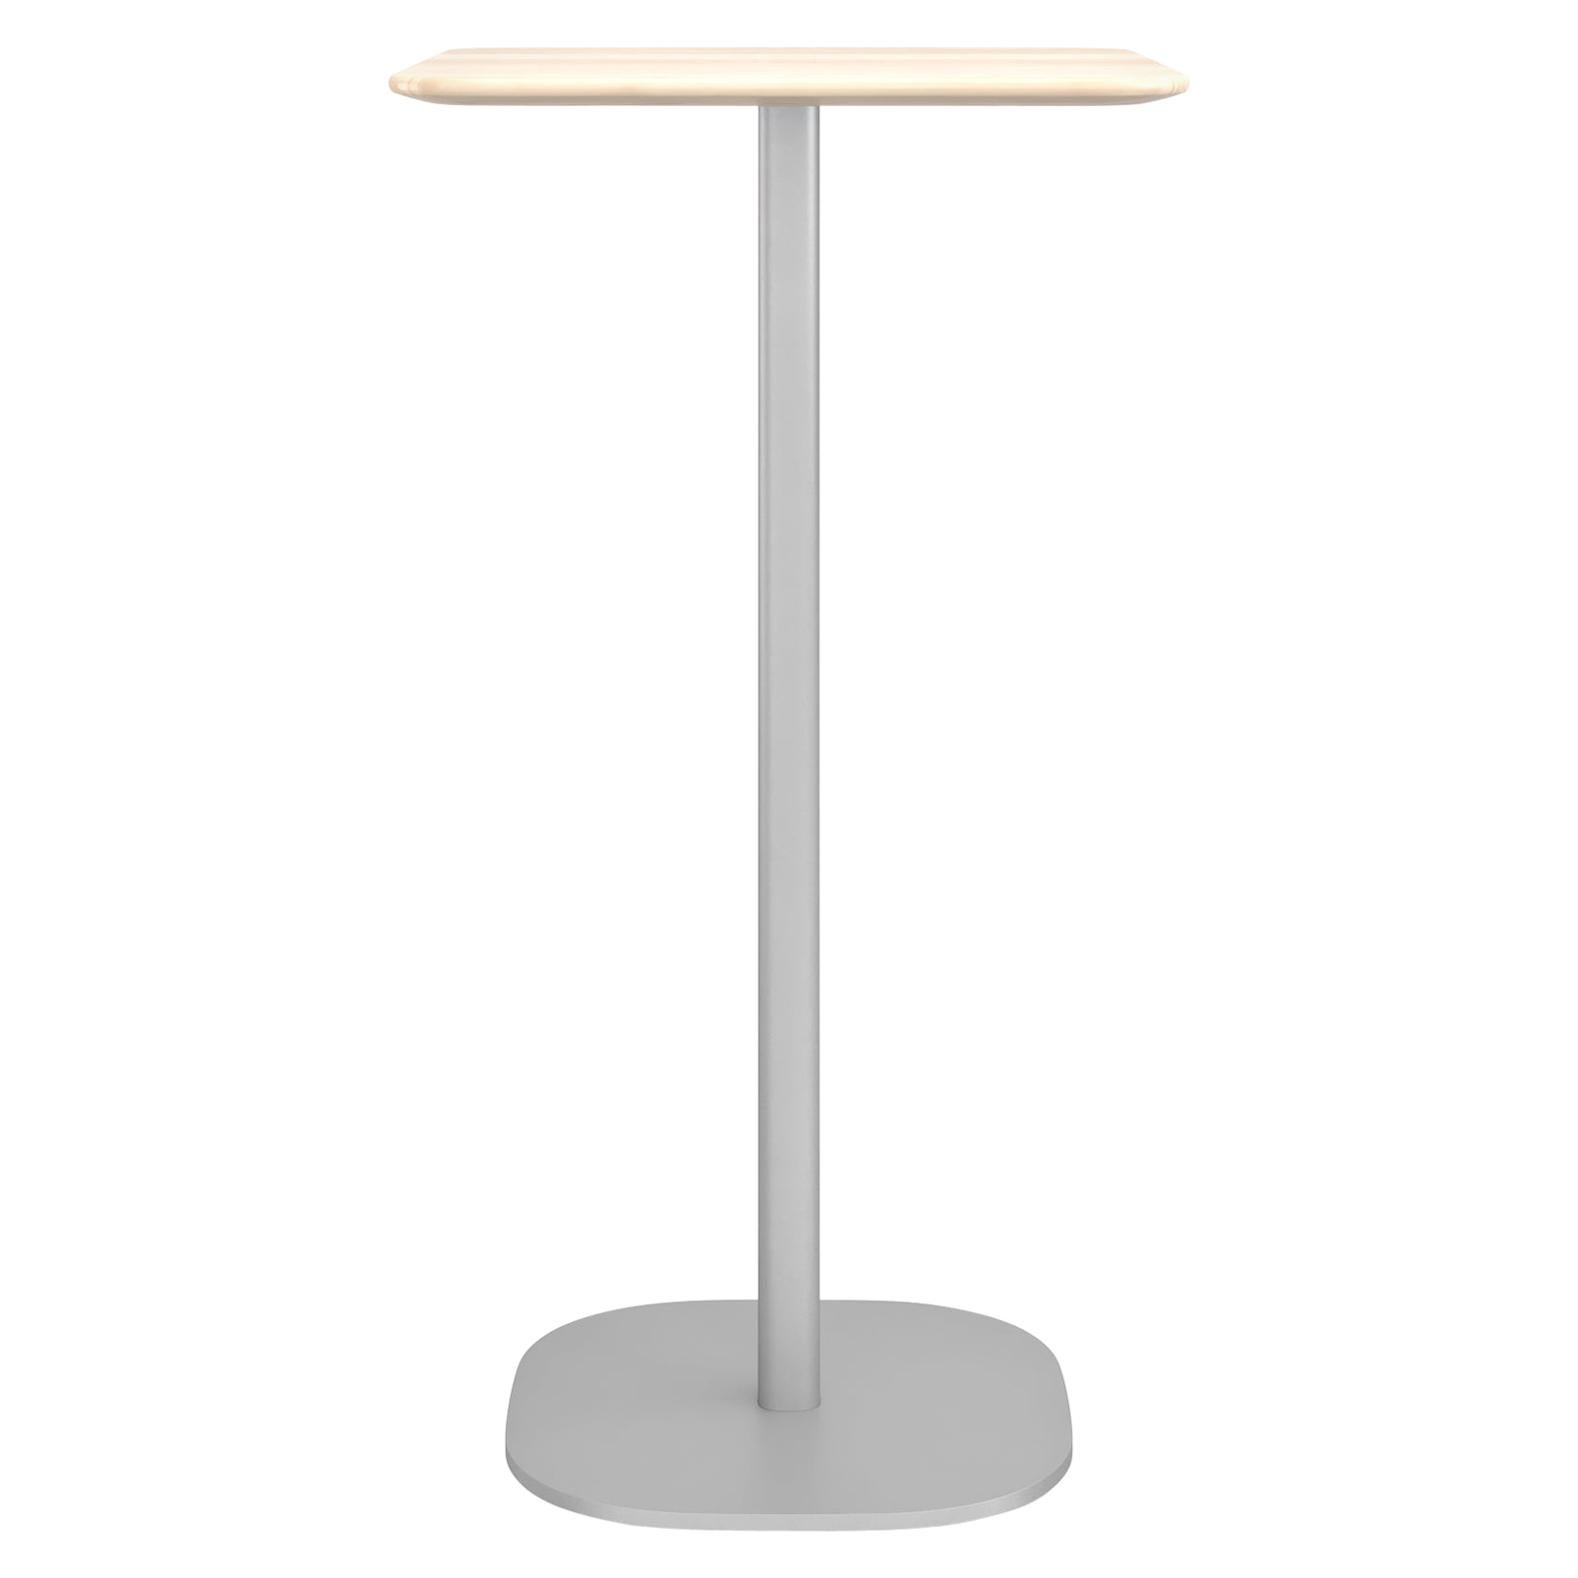 Emeco 2 Inch Small Bar Table with Aluminum Legs & Wood Top by Jasper Morrison For Sale